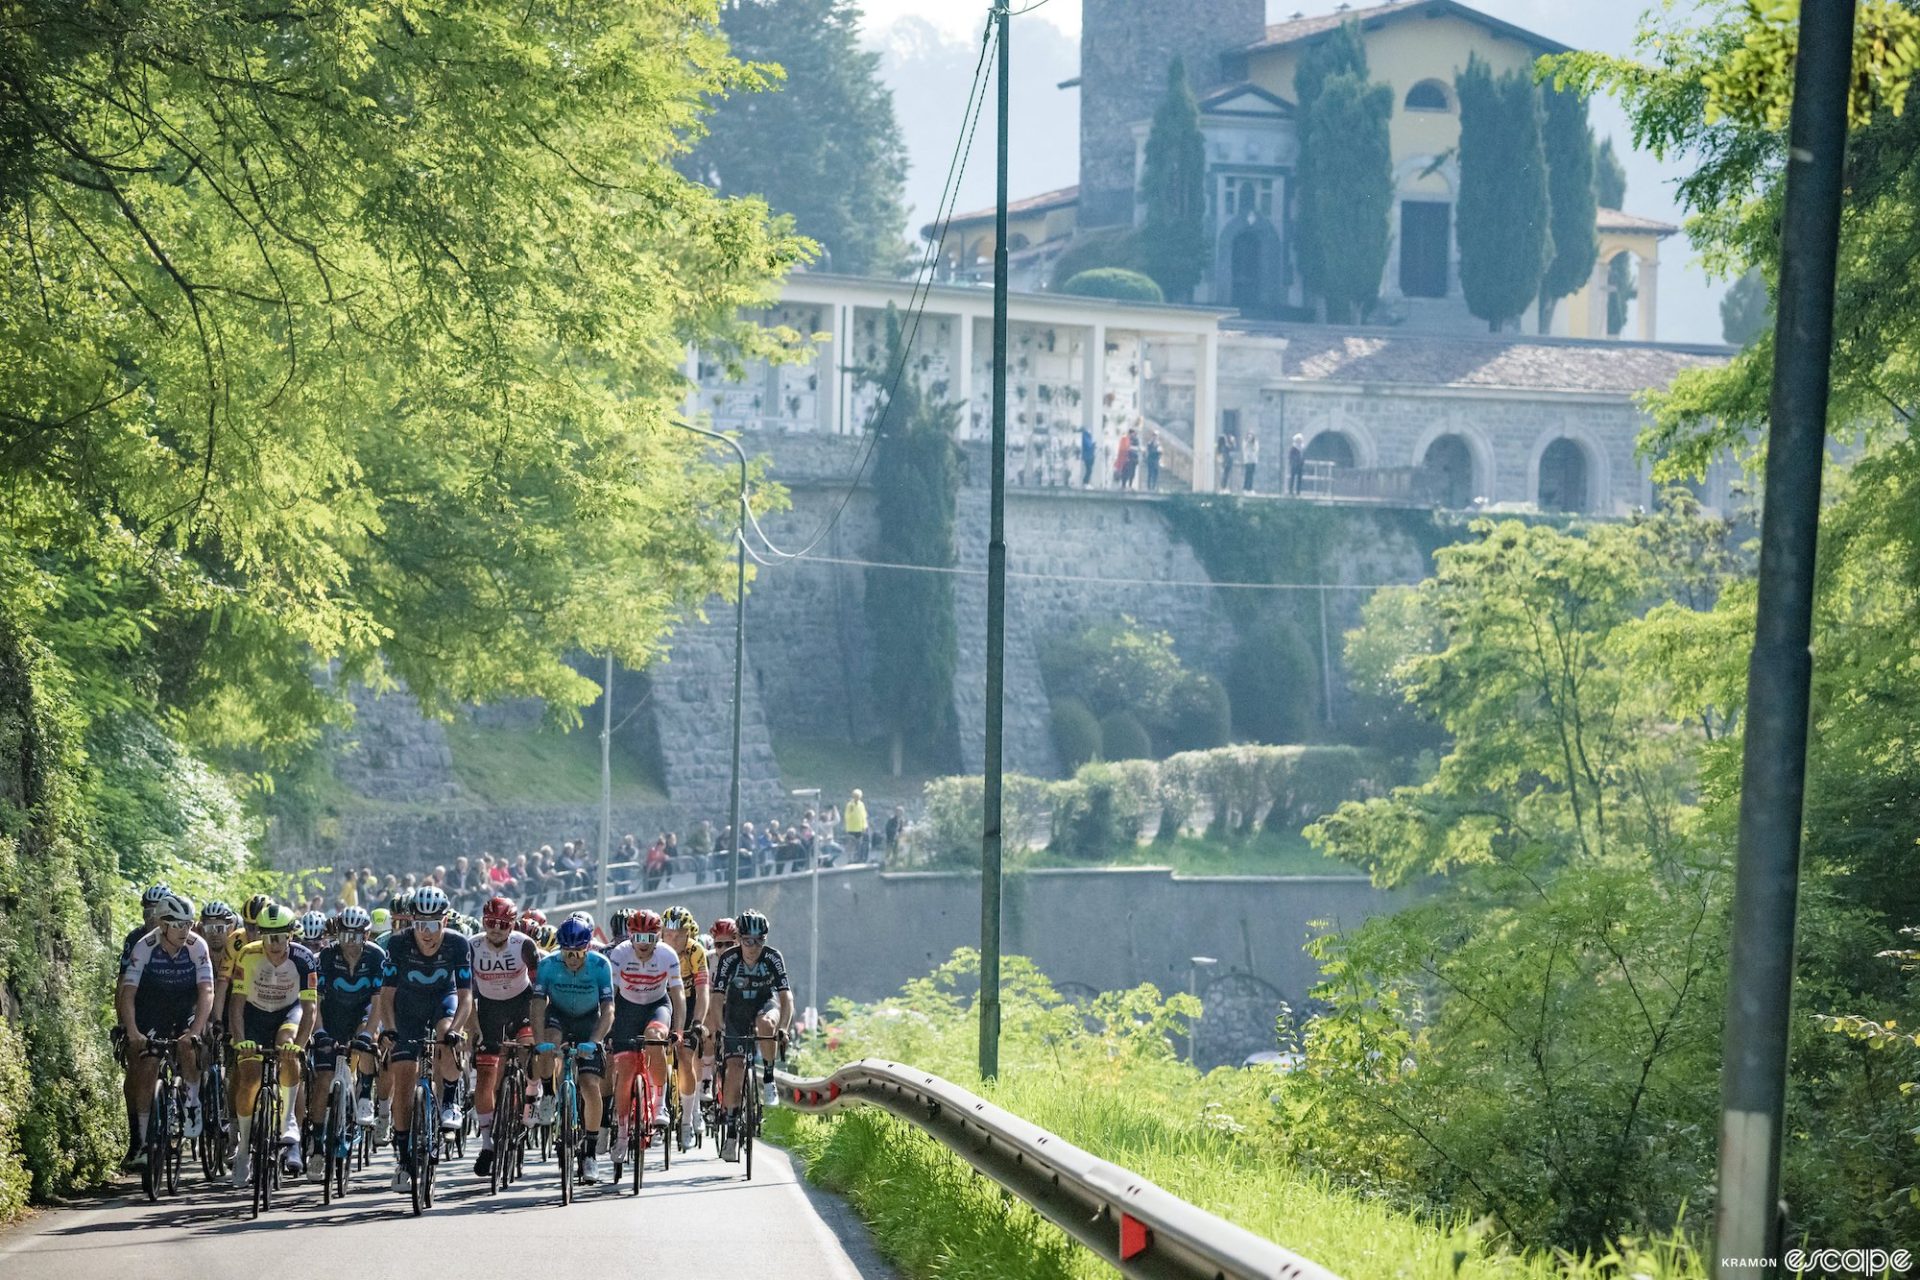 The peloton racing through Lombardy in 2022. The riders are a tight pack, on a road with trees overhanging and a large rock wall and village behind.